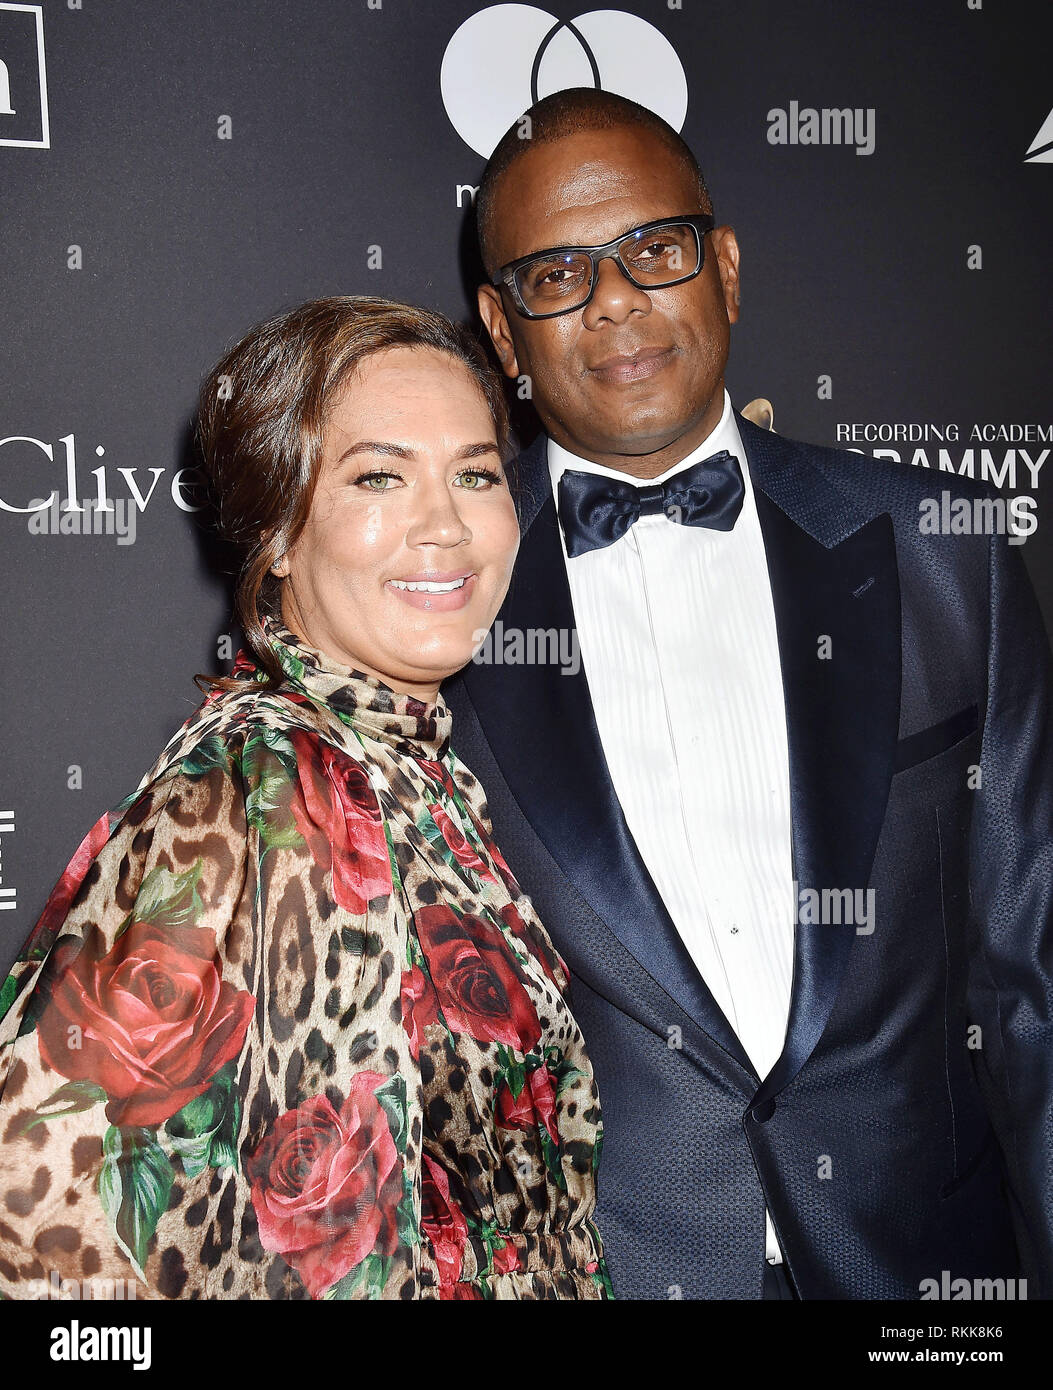 BEVERLY HILLS, CA - FEBRUARY 09: Jon Platt (R) and Angie Platt attend The Recording Academy And Clive Davis' 2019 Pre-GRAMMY Gala at The Beverly Hilto Stock Photo